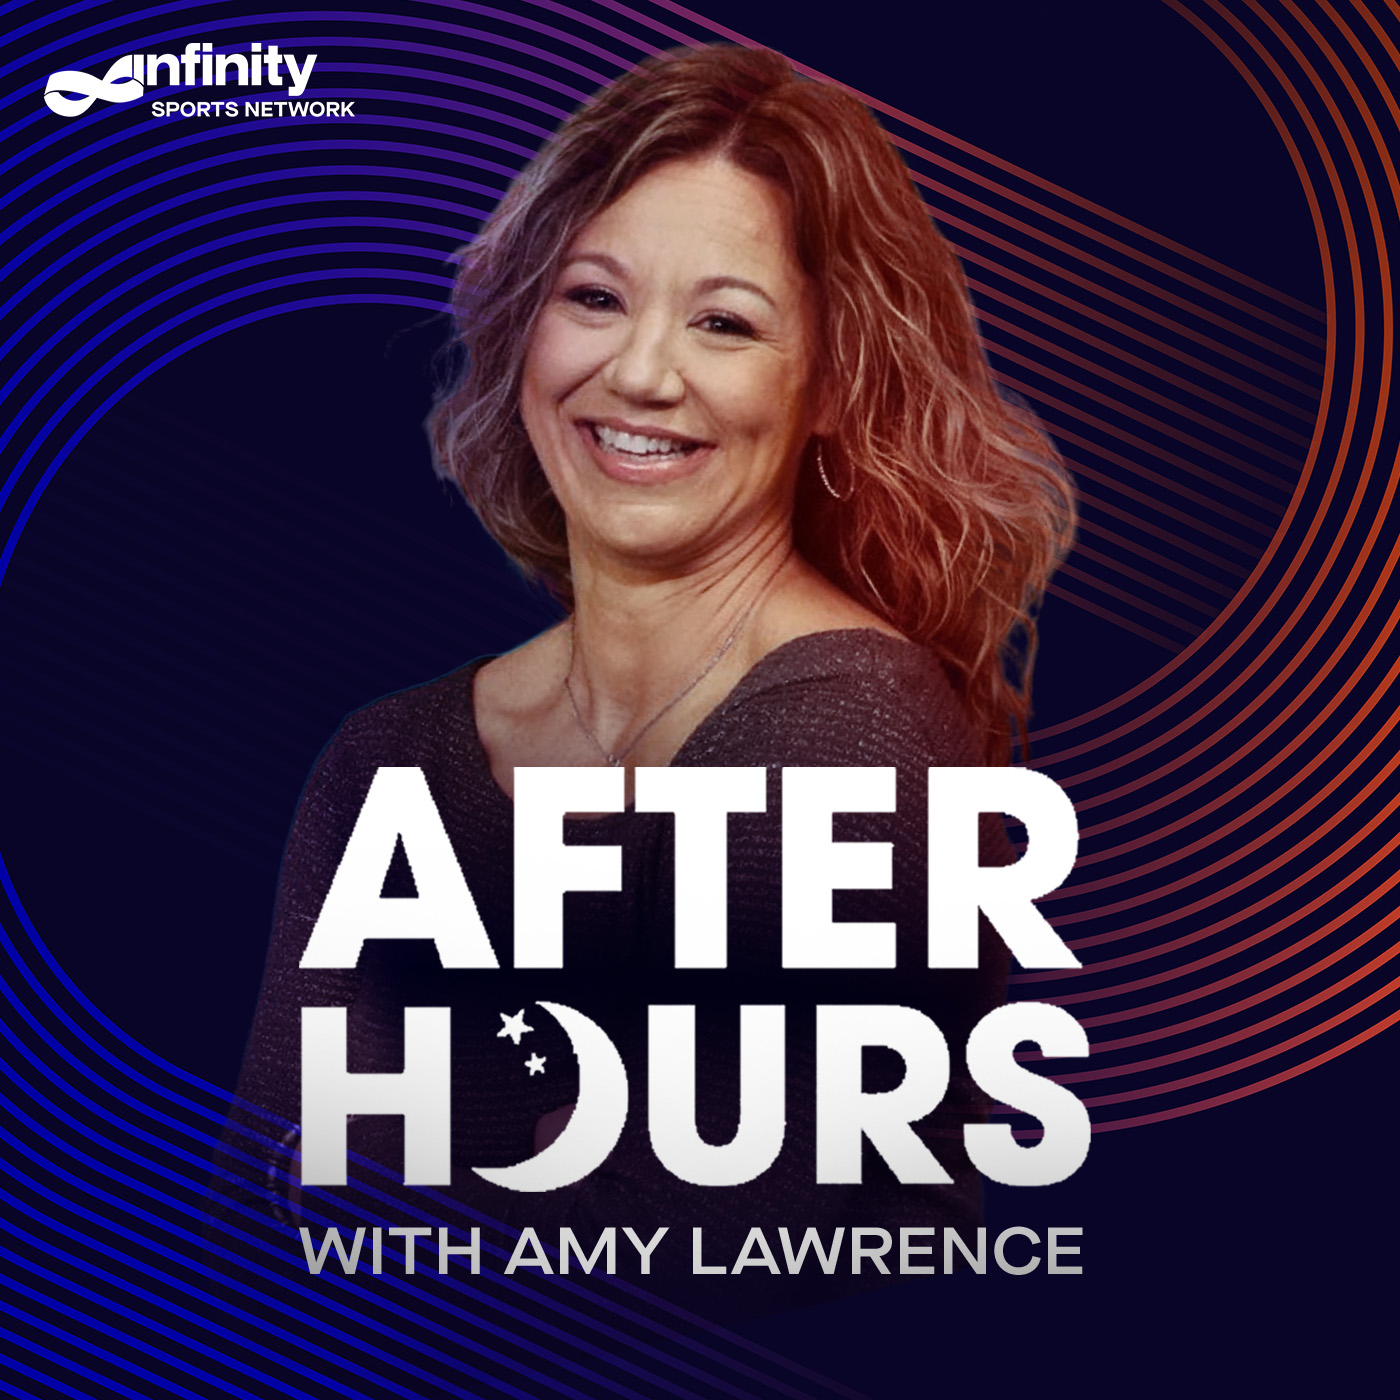 10-8-21 After Hours with Amy Lawrence PODCAST: Hour 3